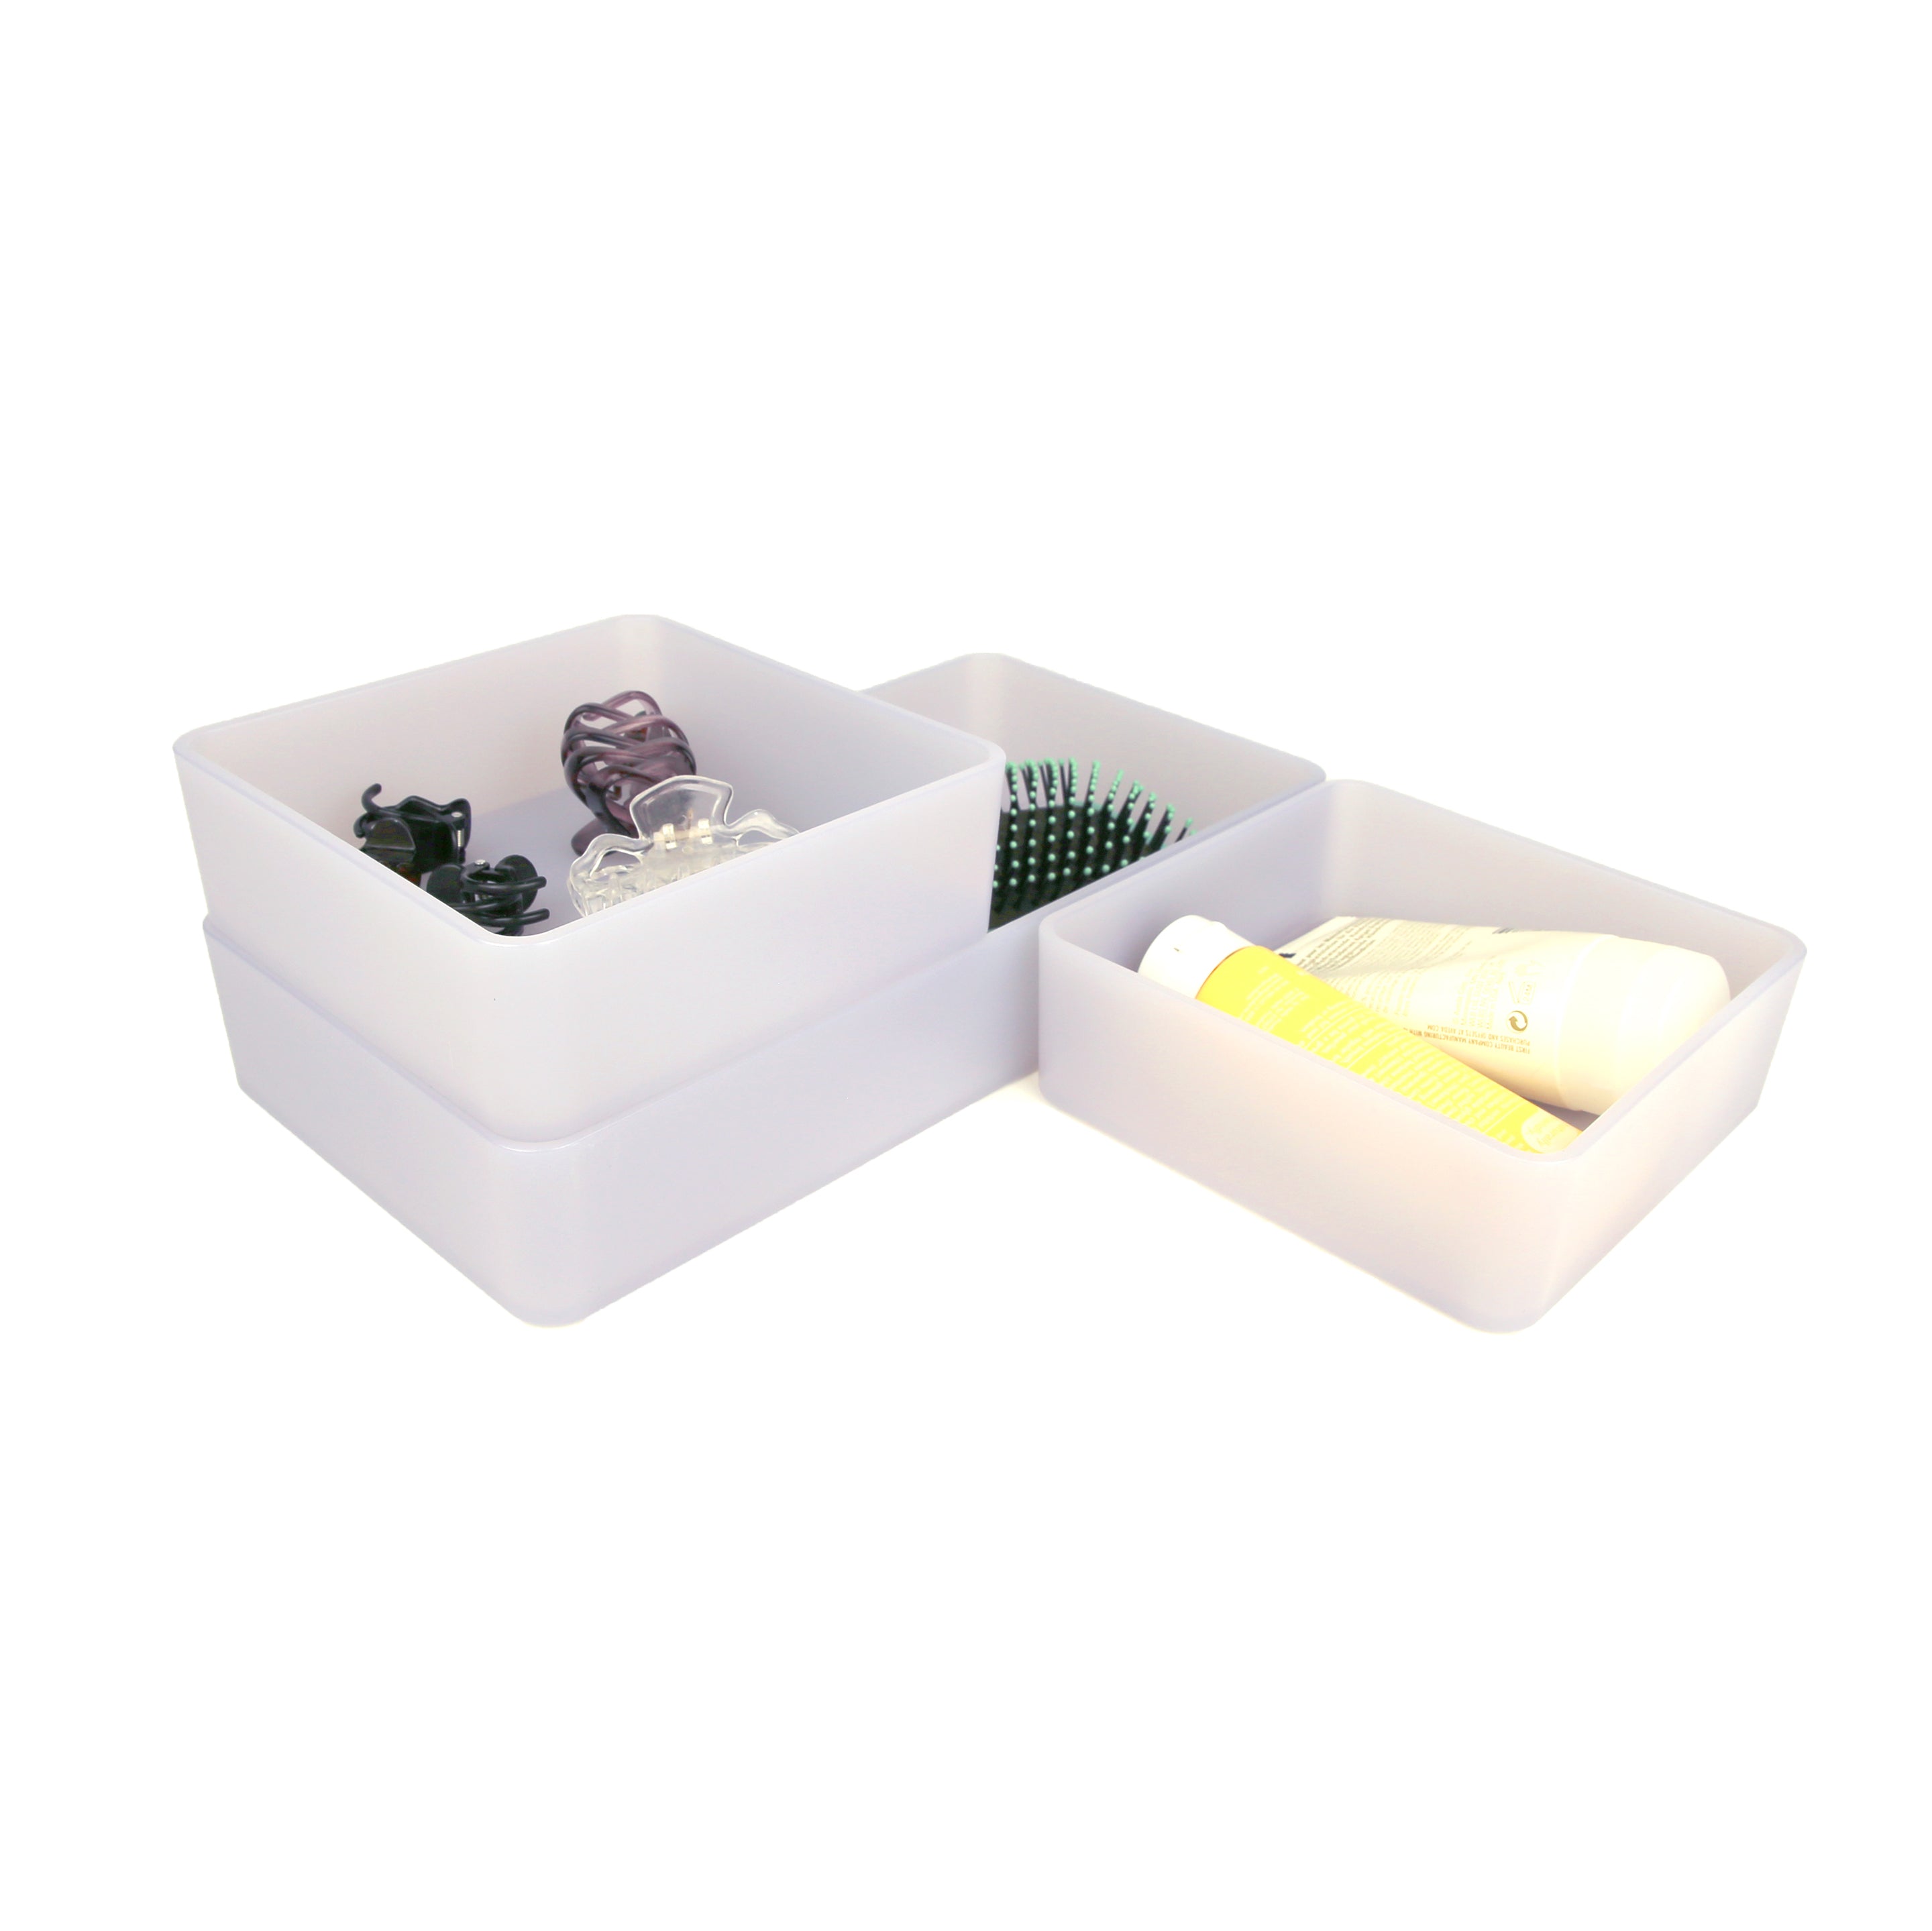 reSTAK recycled stackable organizing bins set of 3 6x12 + 6x6